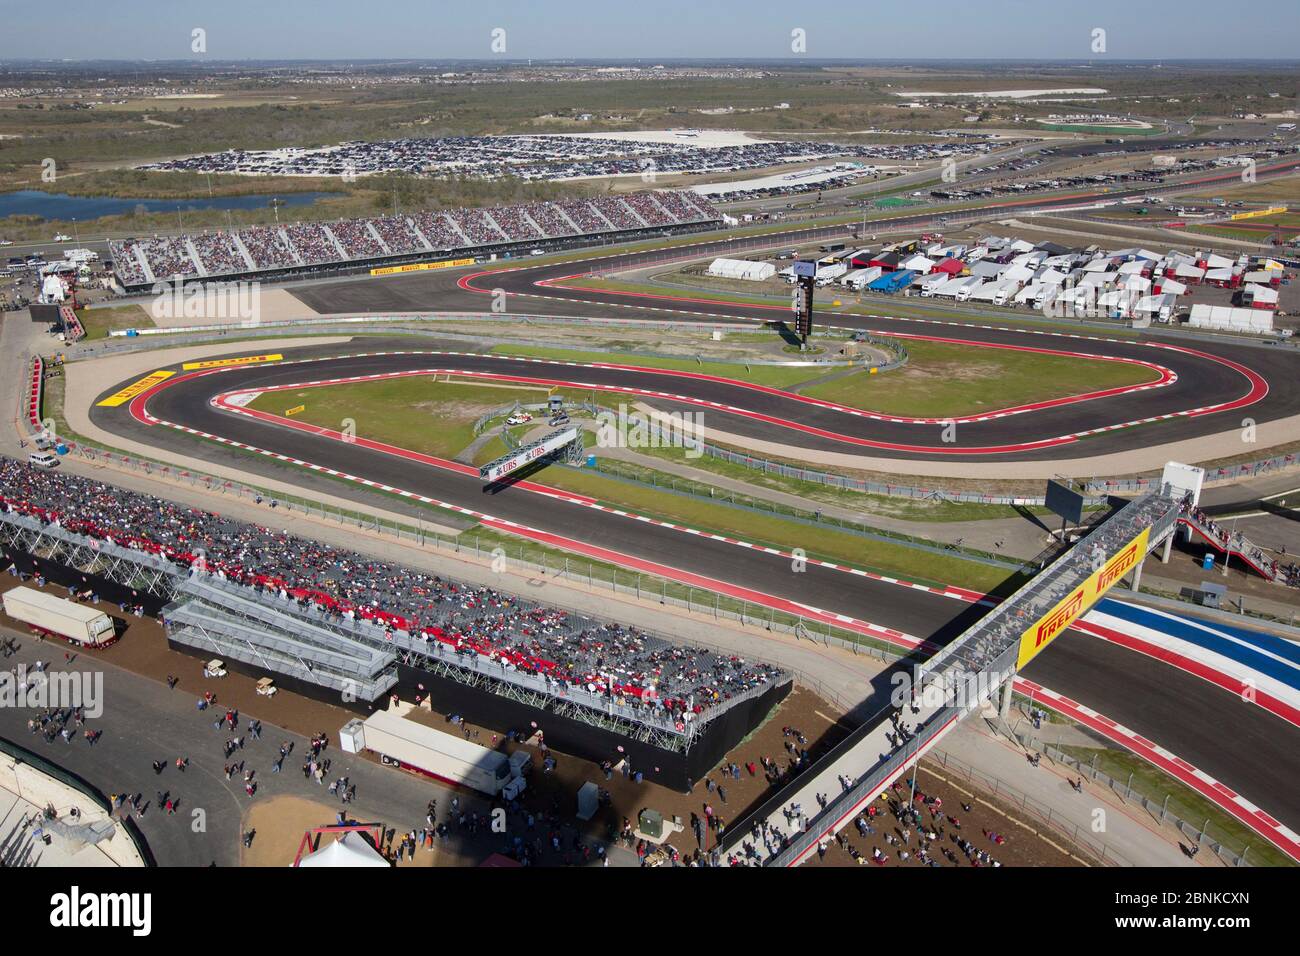 Austin Texas USA, November 16 2012: Overview of the back turns of the Circuit of the Americas race track during Friday afternoon practice session for Sunday's Formula One United States Grand Prix. ©Bob Daemmrich Stock Photo